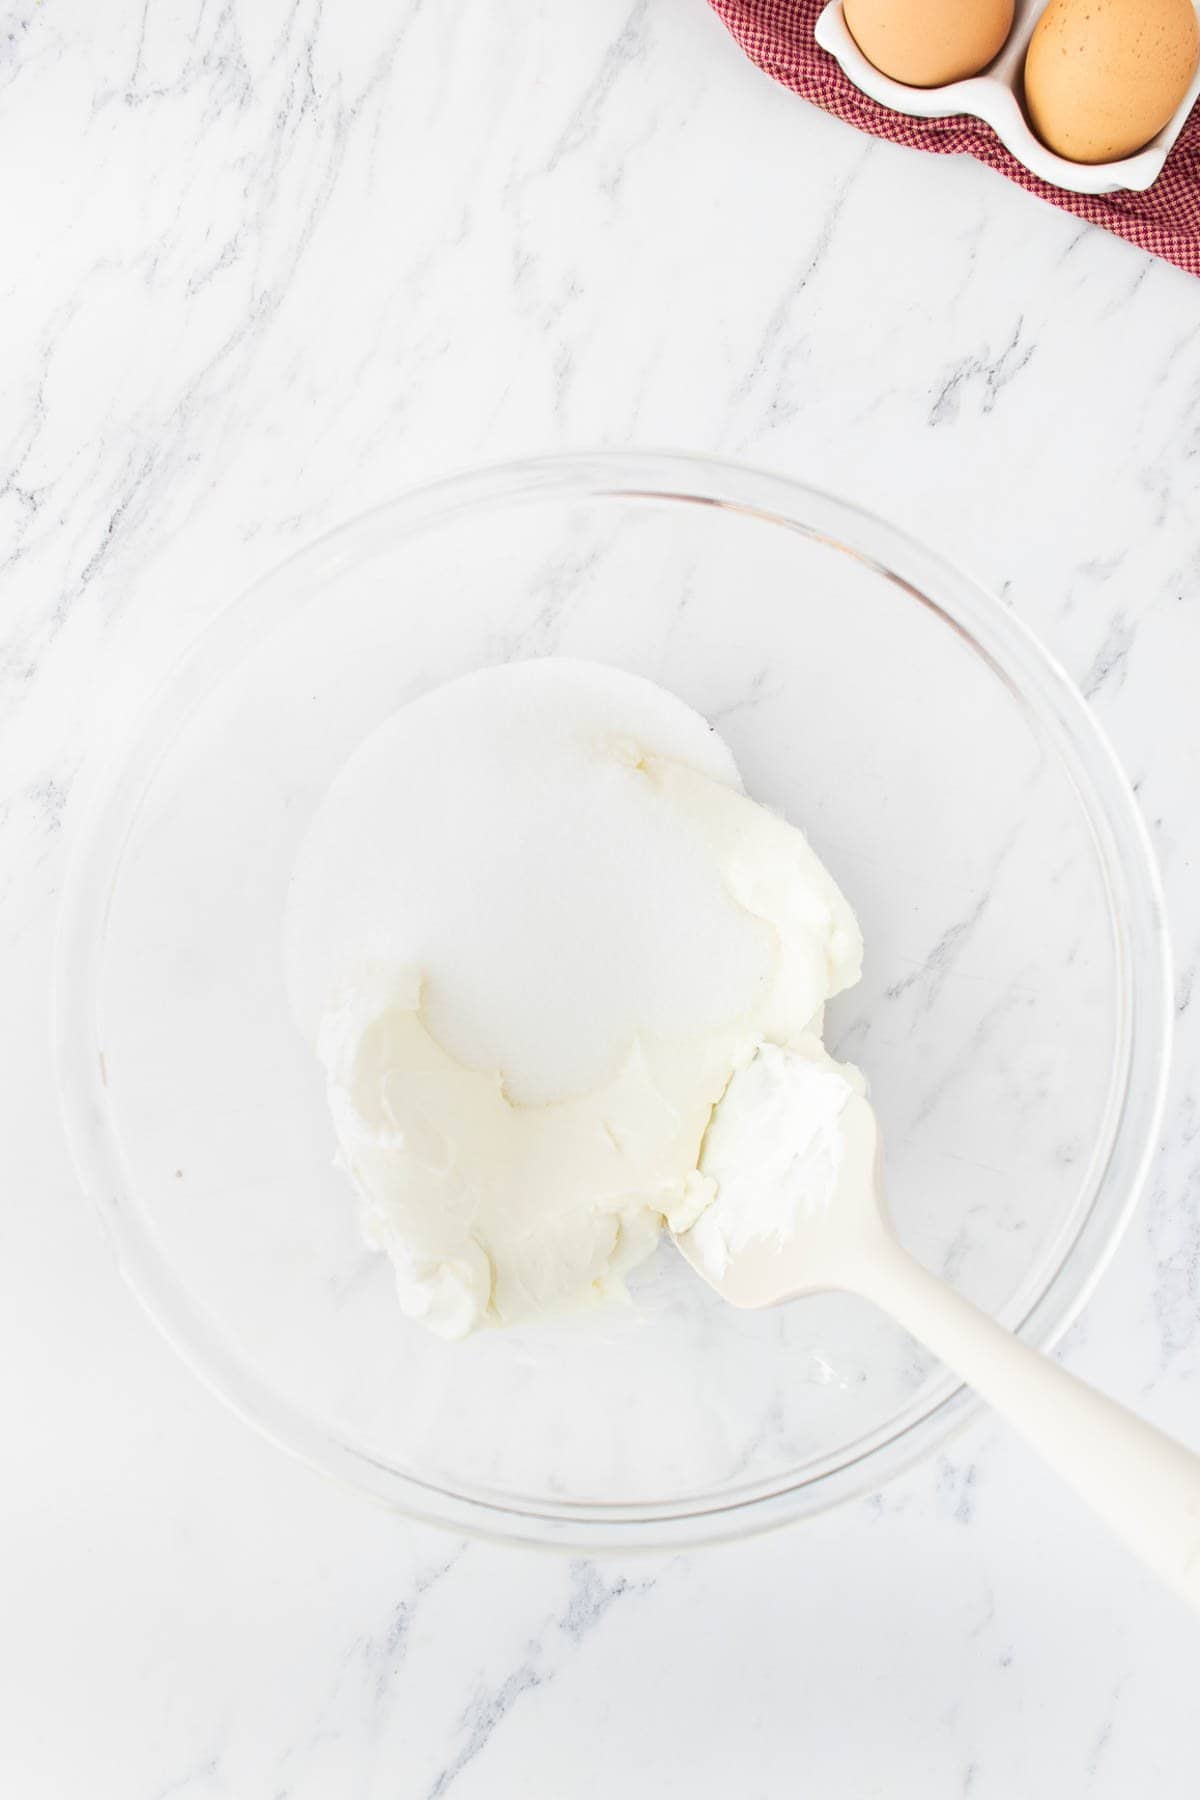 Combining softened cream cheese and granulated sugar in a large glass mixing bowl.